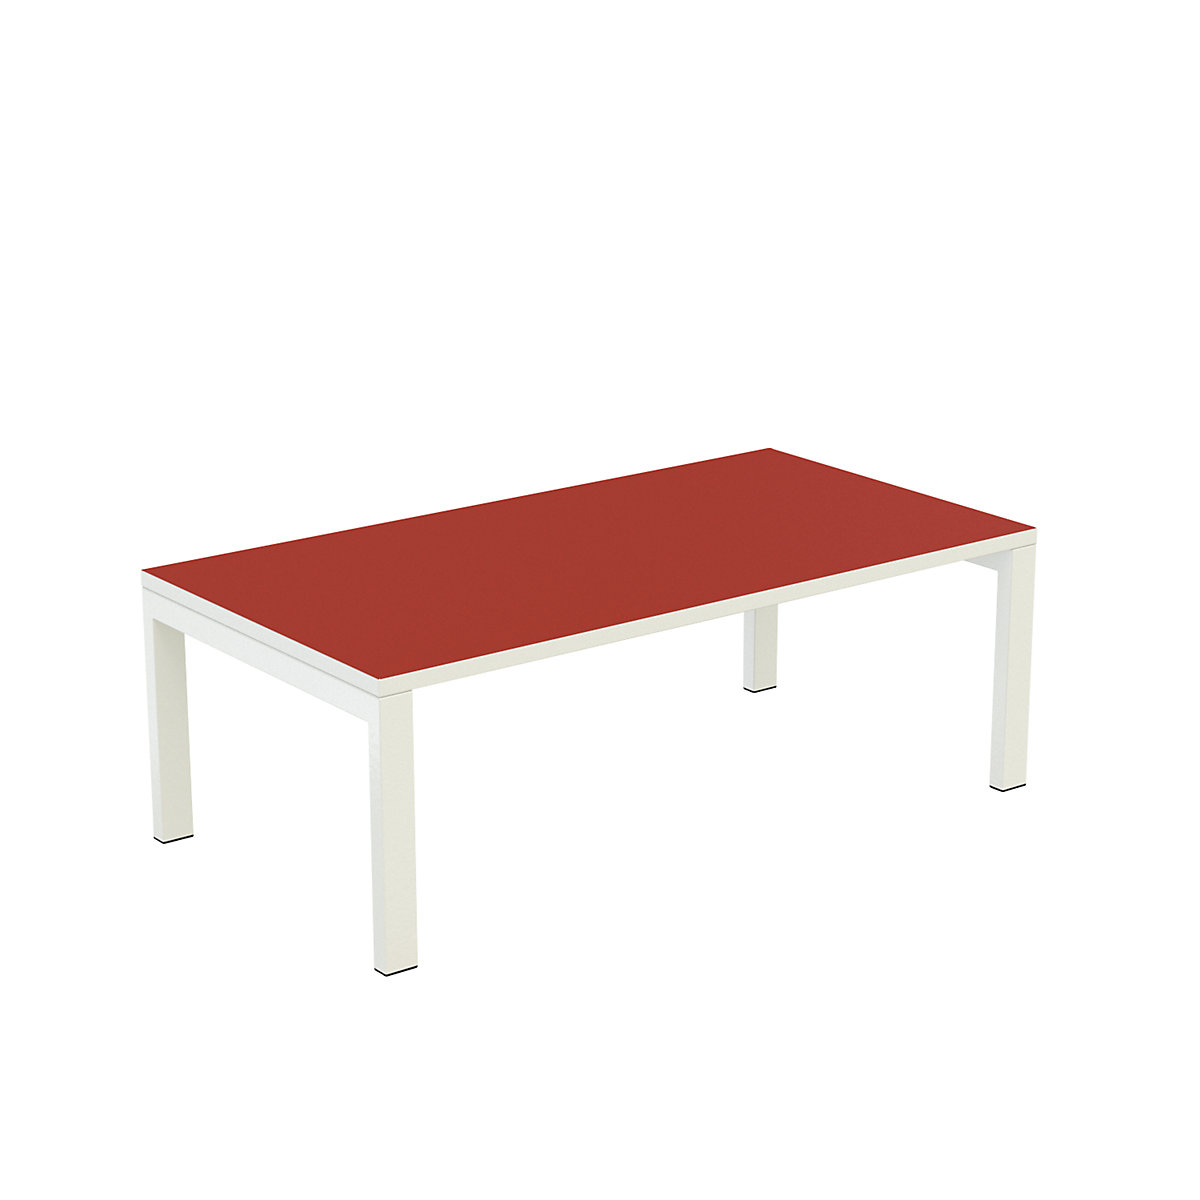 easyDesk® side table – Paperflow, HxWxD 400 x 1140 x 600 mm, red-11